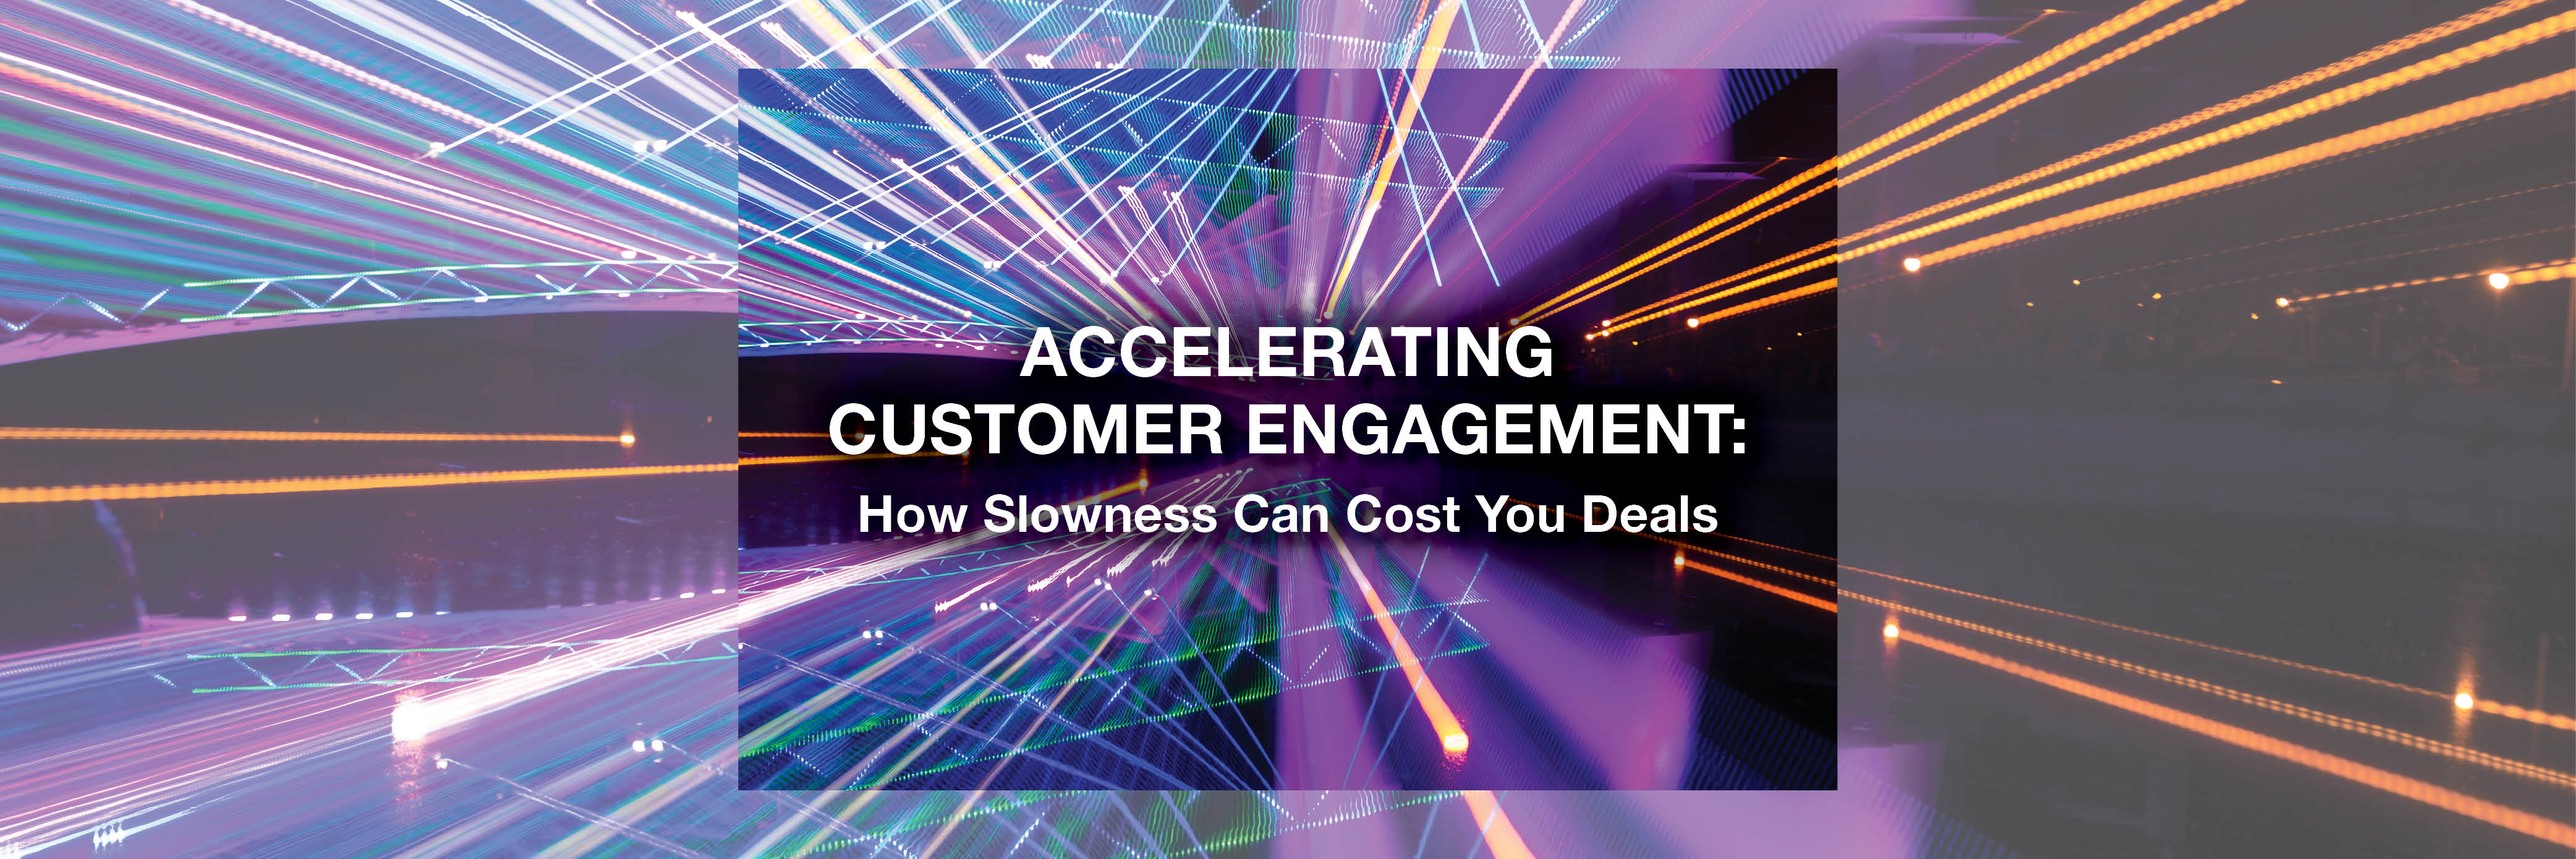 Accelerating Customer Engagement: How Slowness Can Cost You Deals